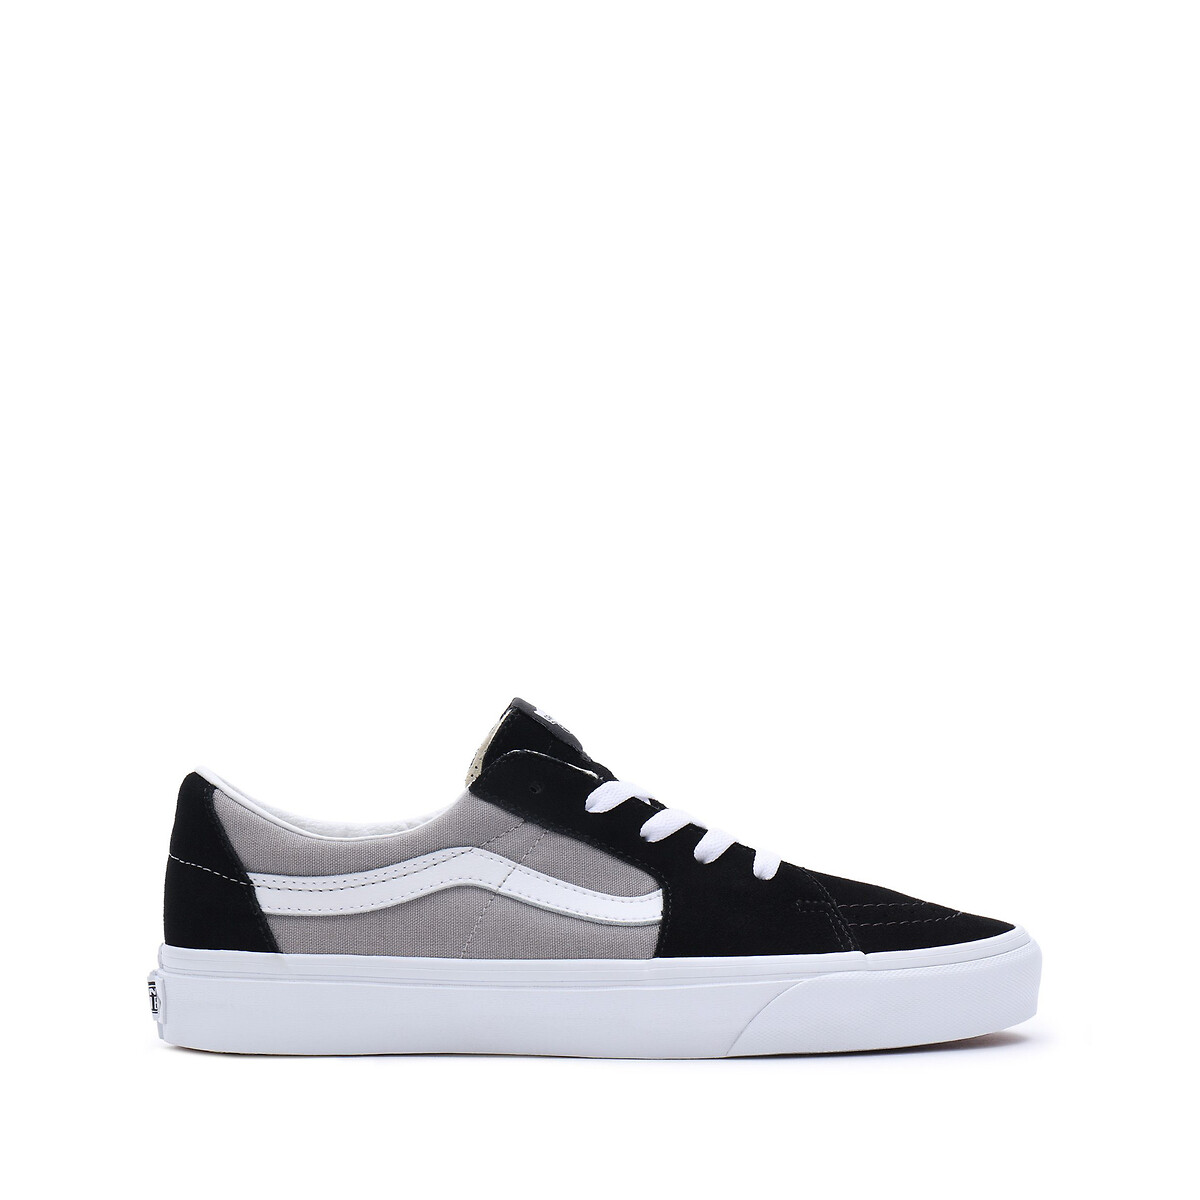 sk8-low suede trainers